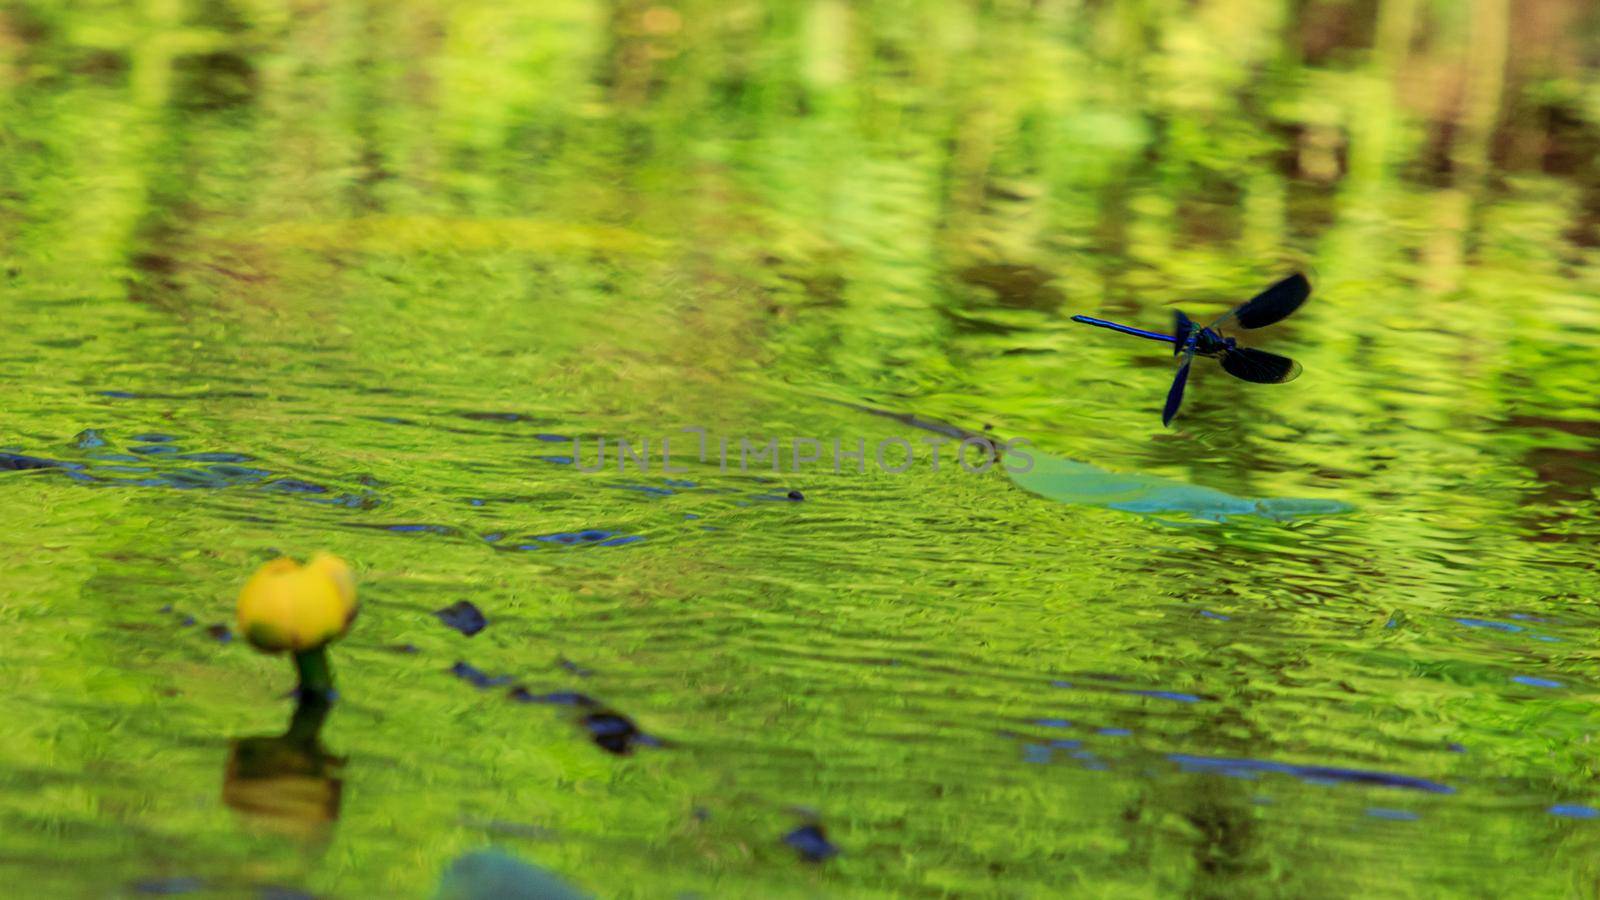 Blue dragonfly insect flying on water lilie by scudrinja